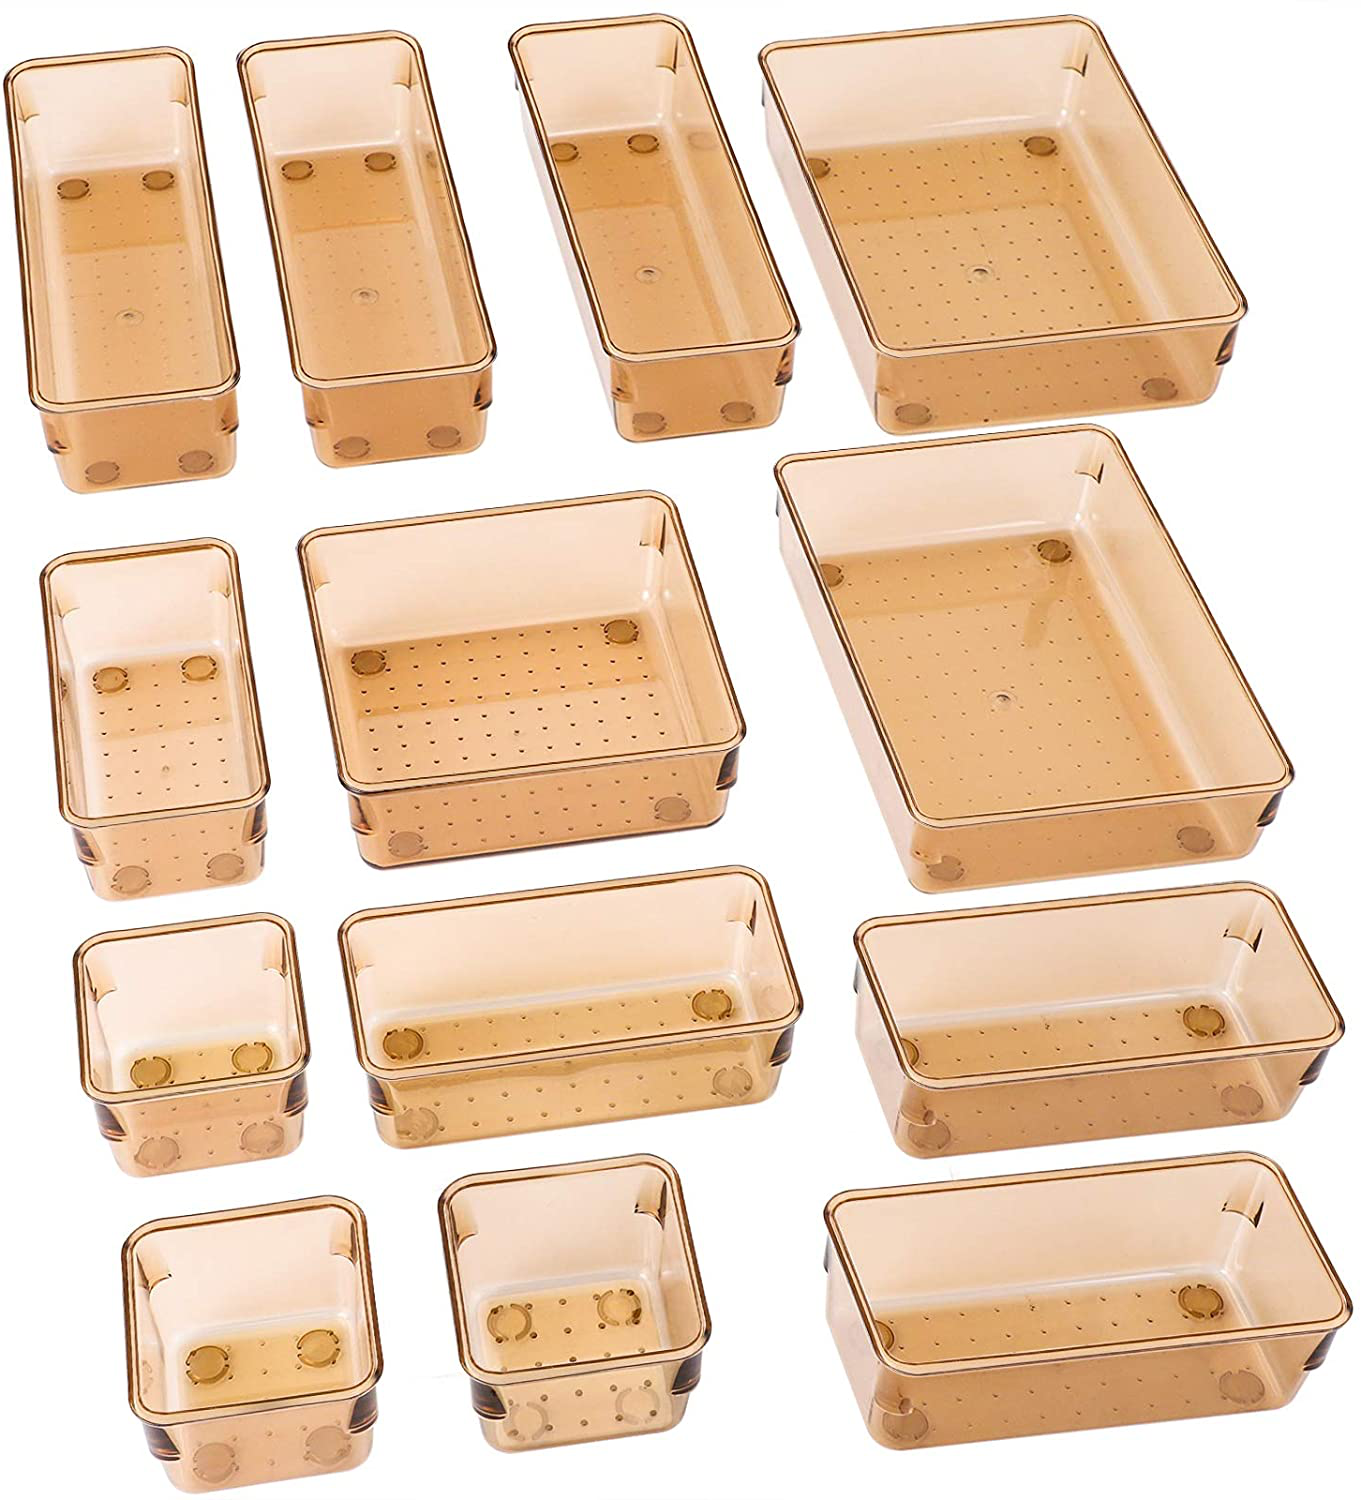 SMARTAKE 13-Piece Drawer Organizers with Non-Slip Silicone Pads, 5-Size Desk Drawer Organizer Trays Storage Tray for Makeup, Jewelries, Utensils in Bedroom Dresser, Office and Kitchen, Light Brown